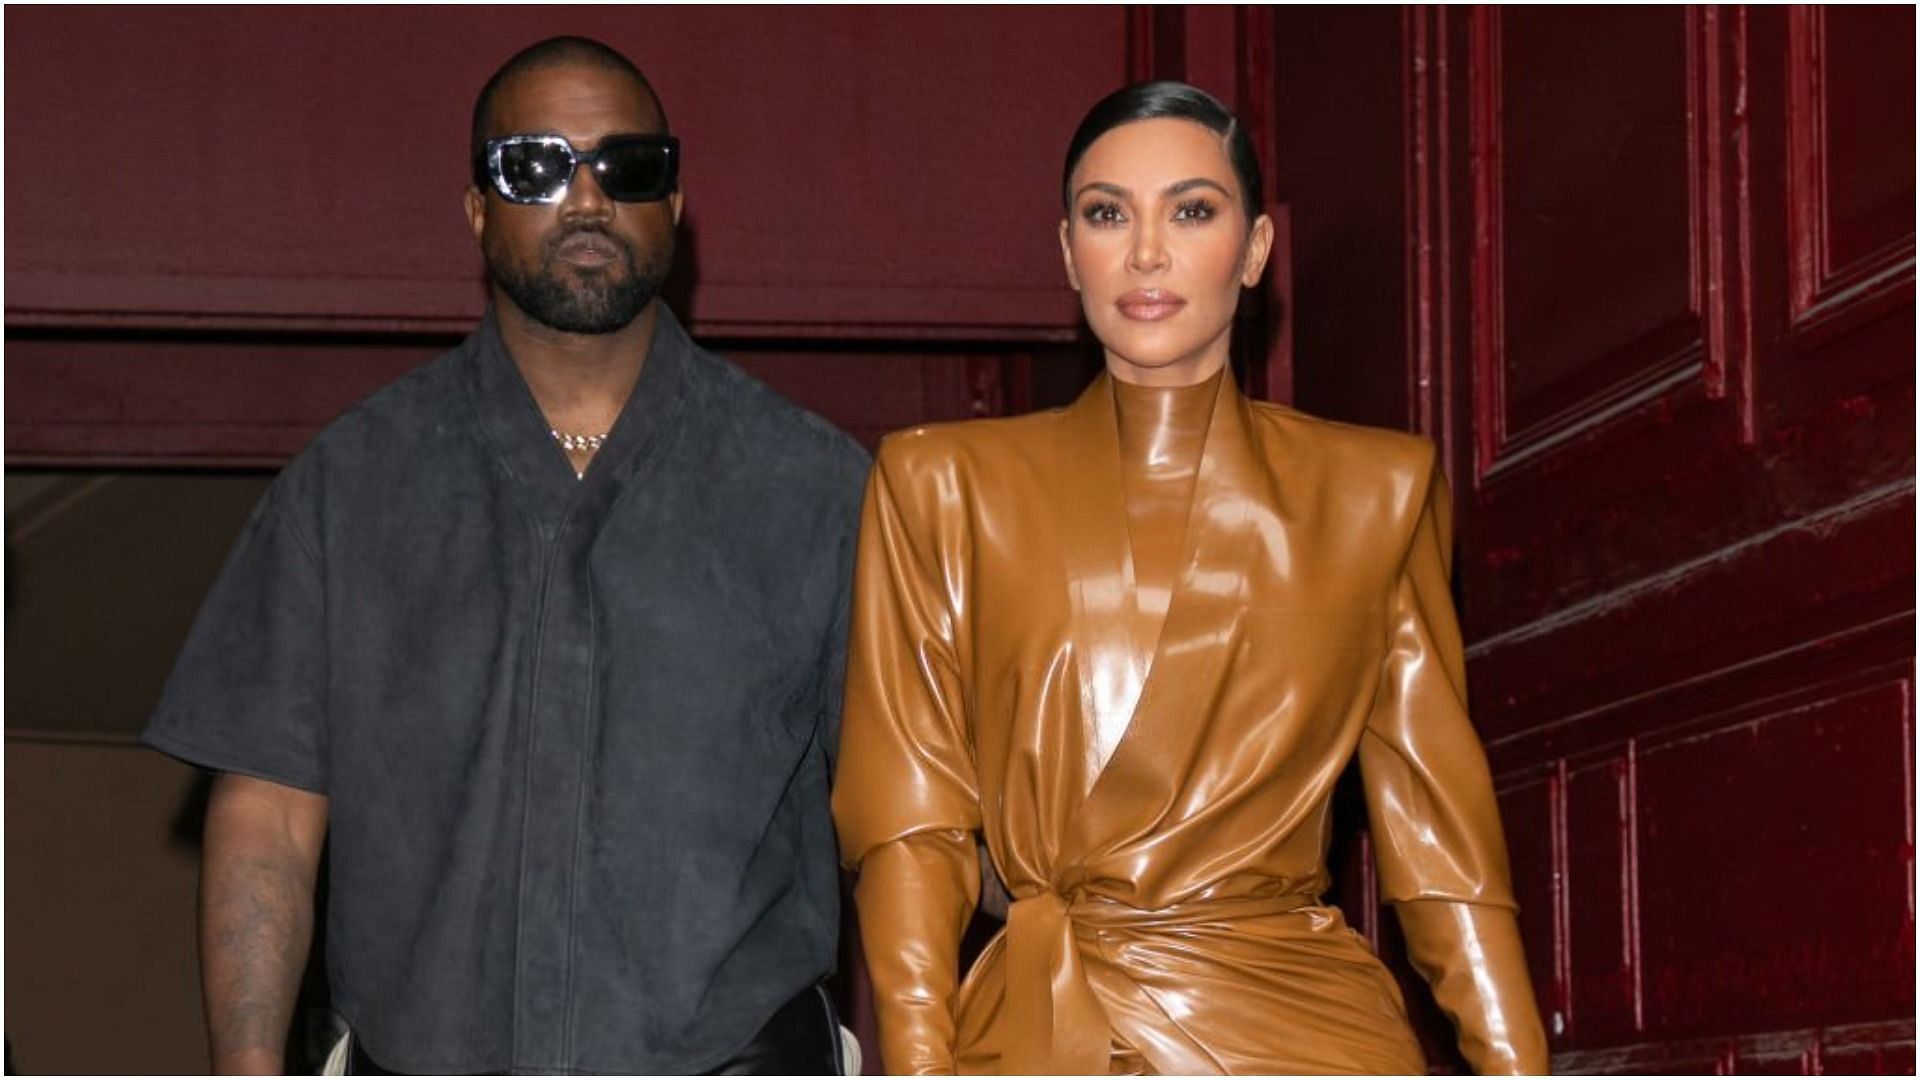 Kanye West penned down a poem for his ex-wife Kim Kardashian (Image via Marc Piasecki/Getty Images)